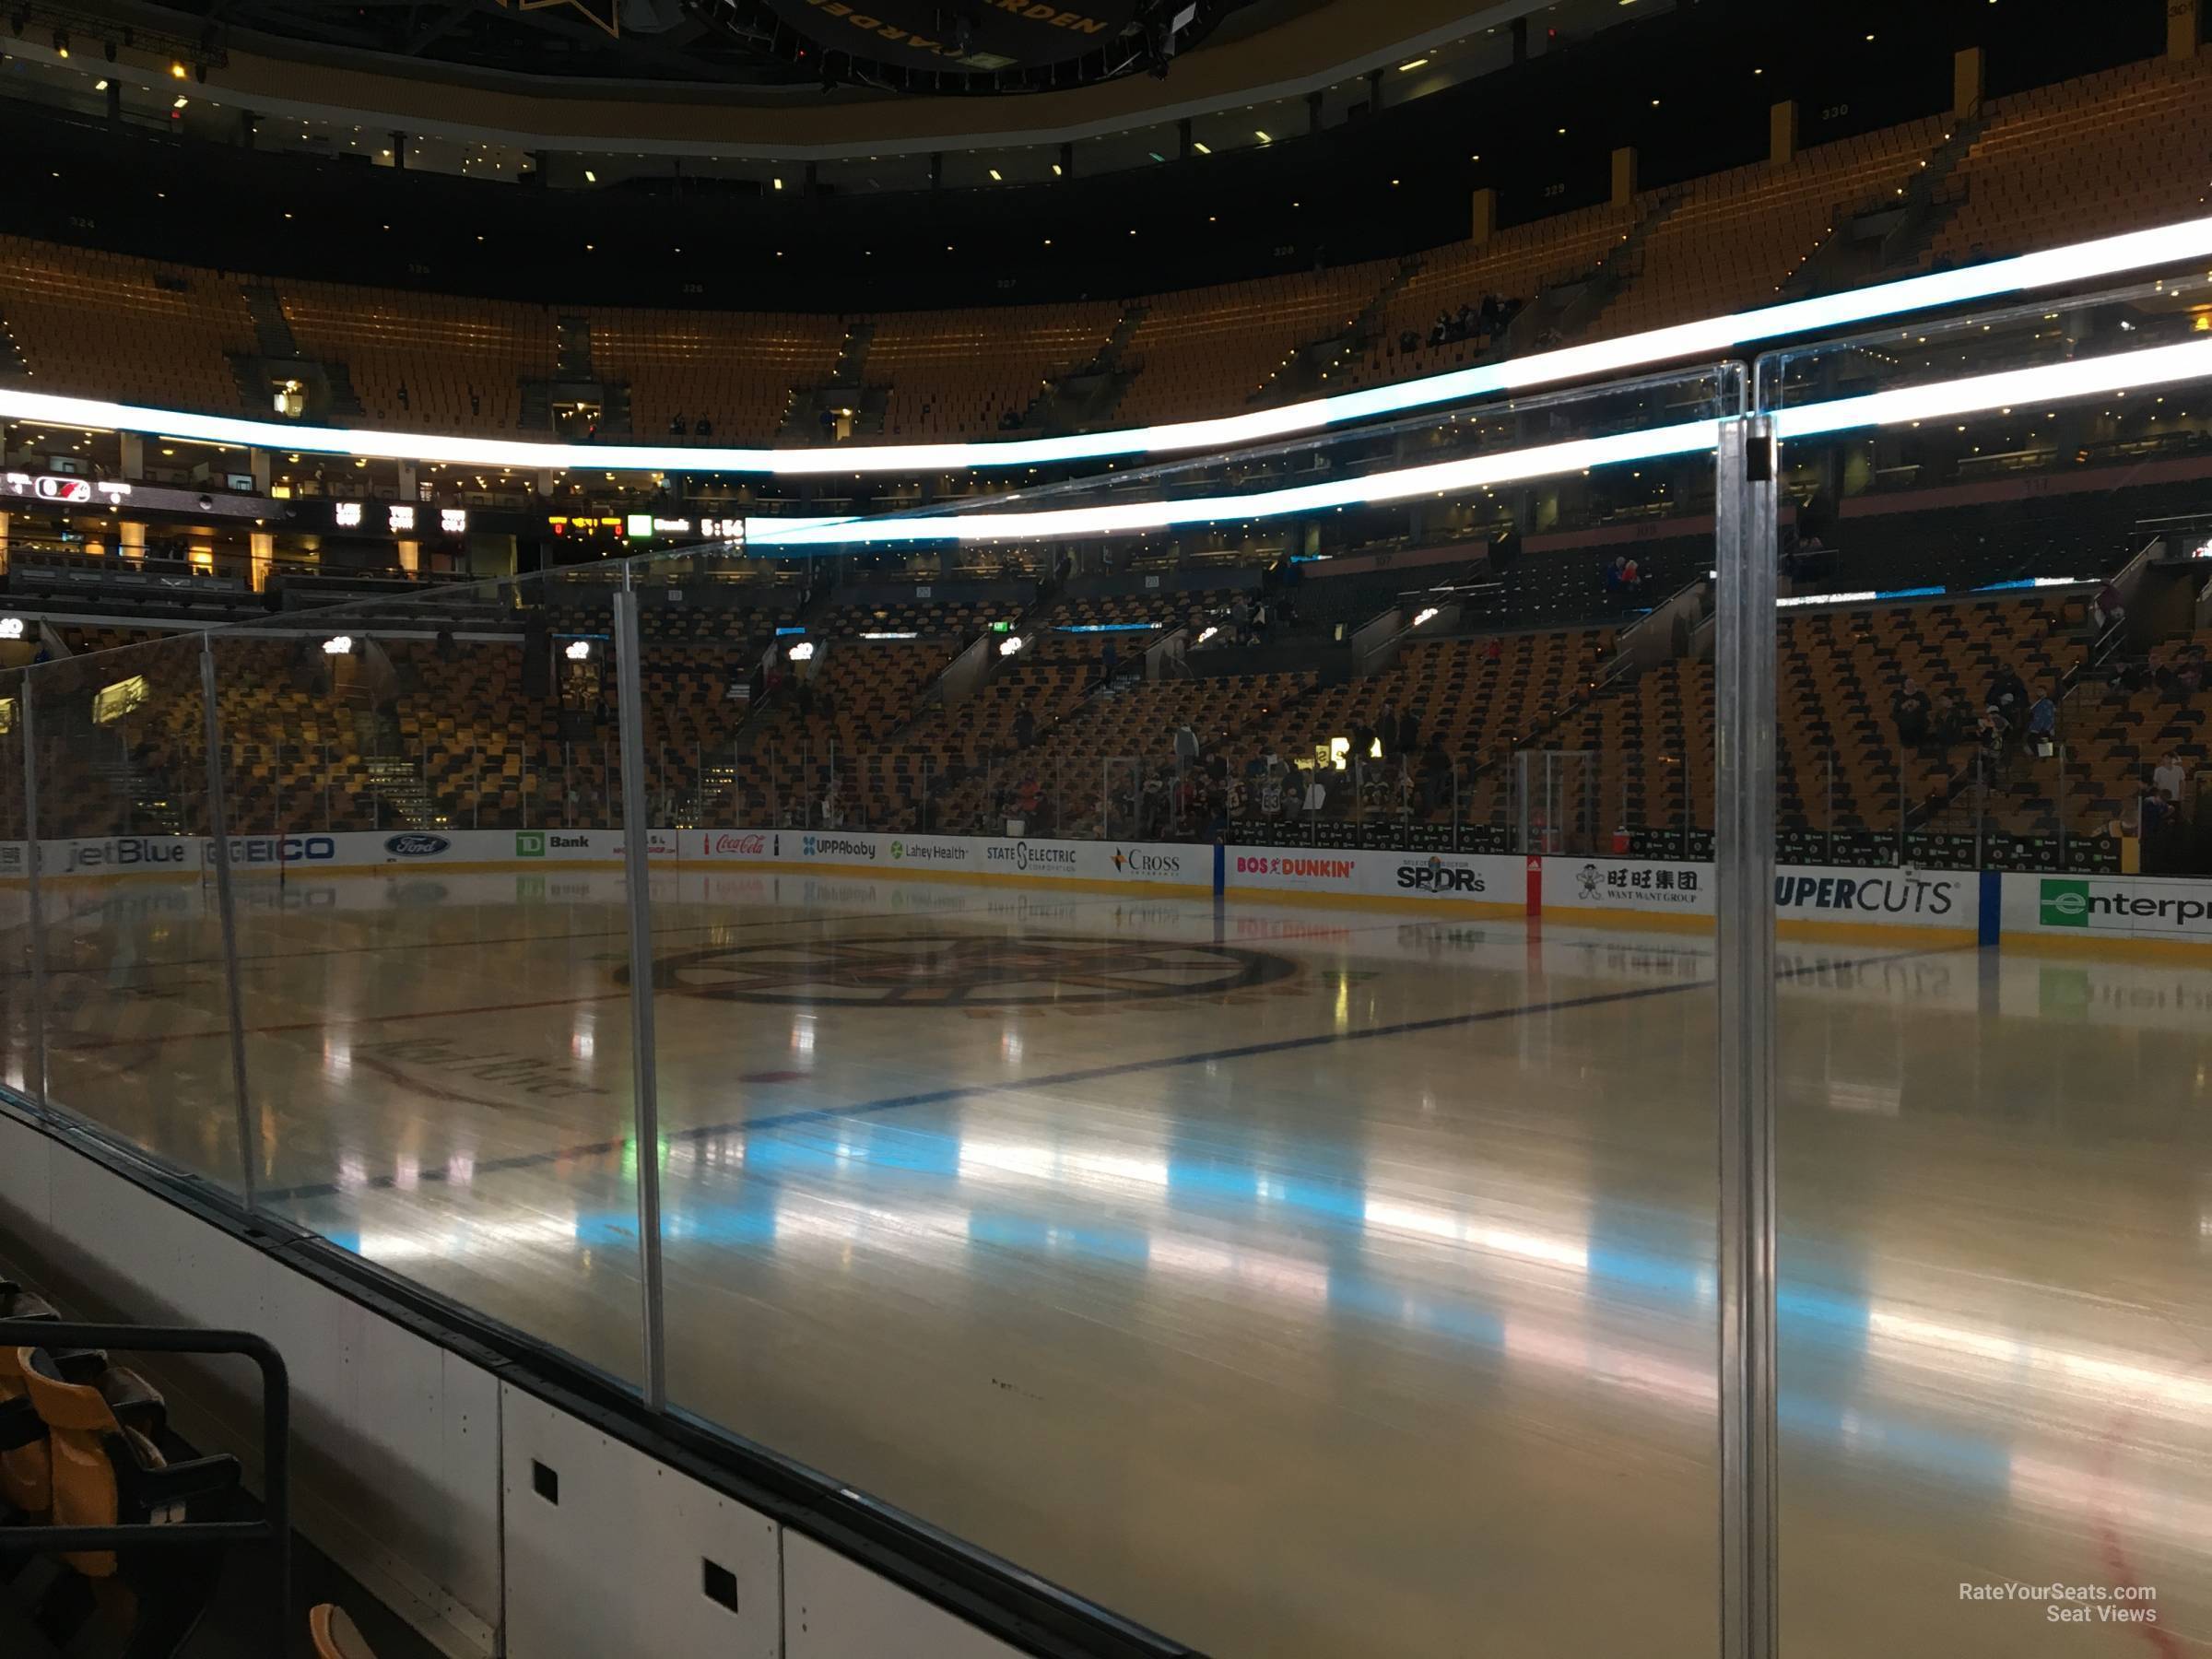 loge 10, row 3 seat view  for hockey - td garden